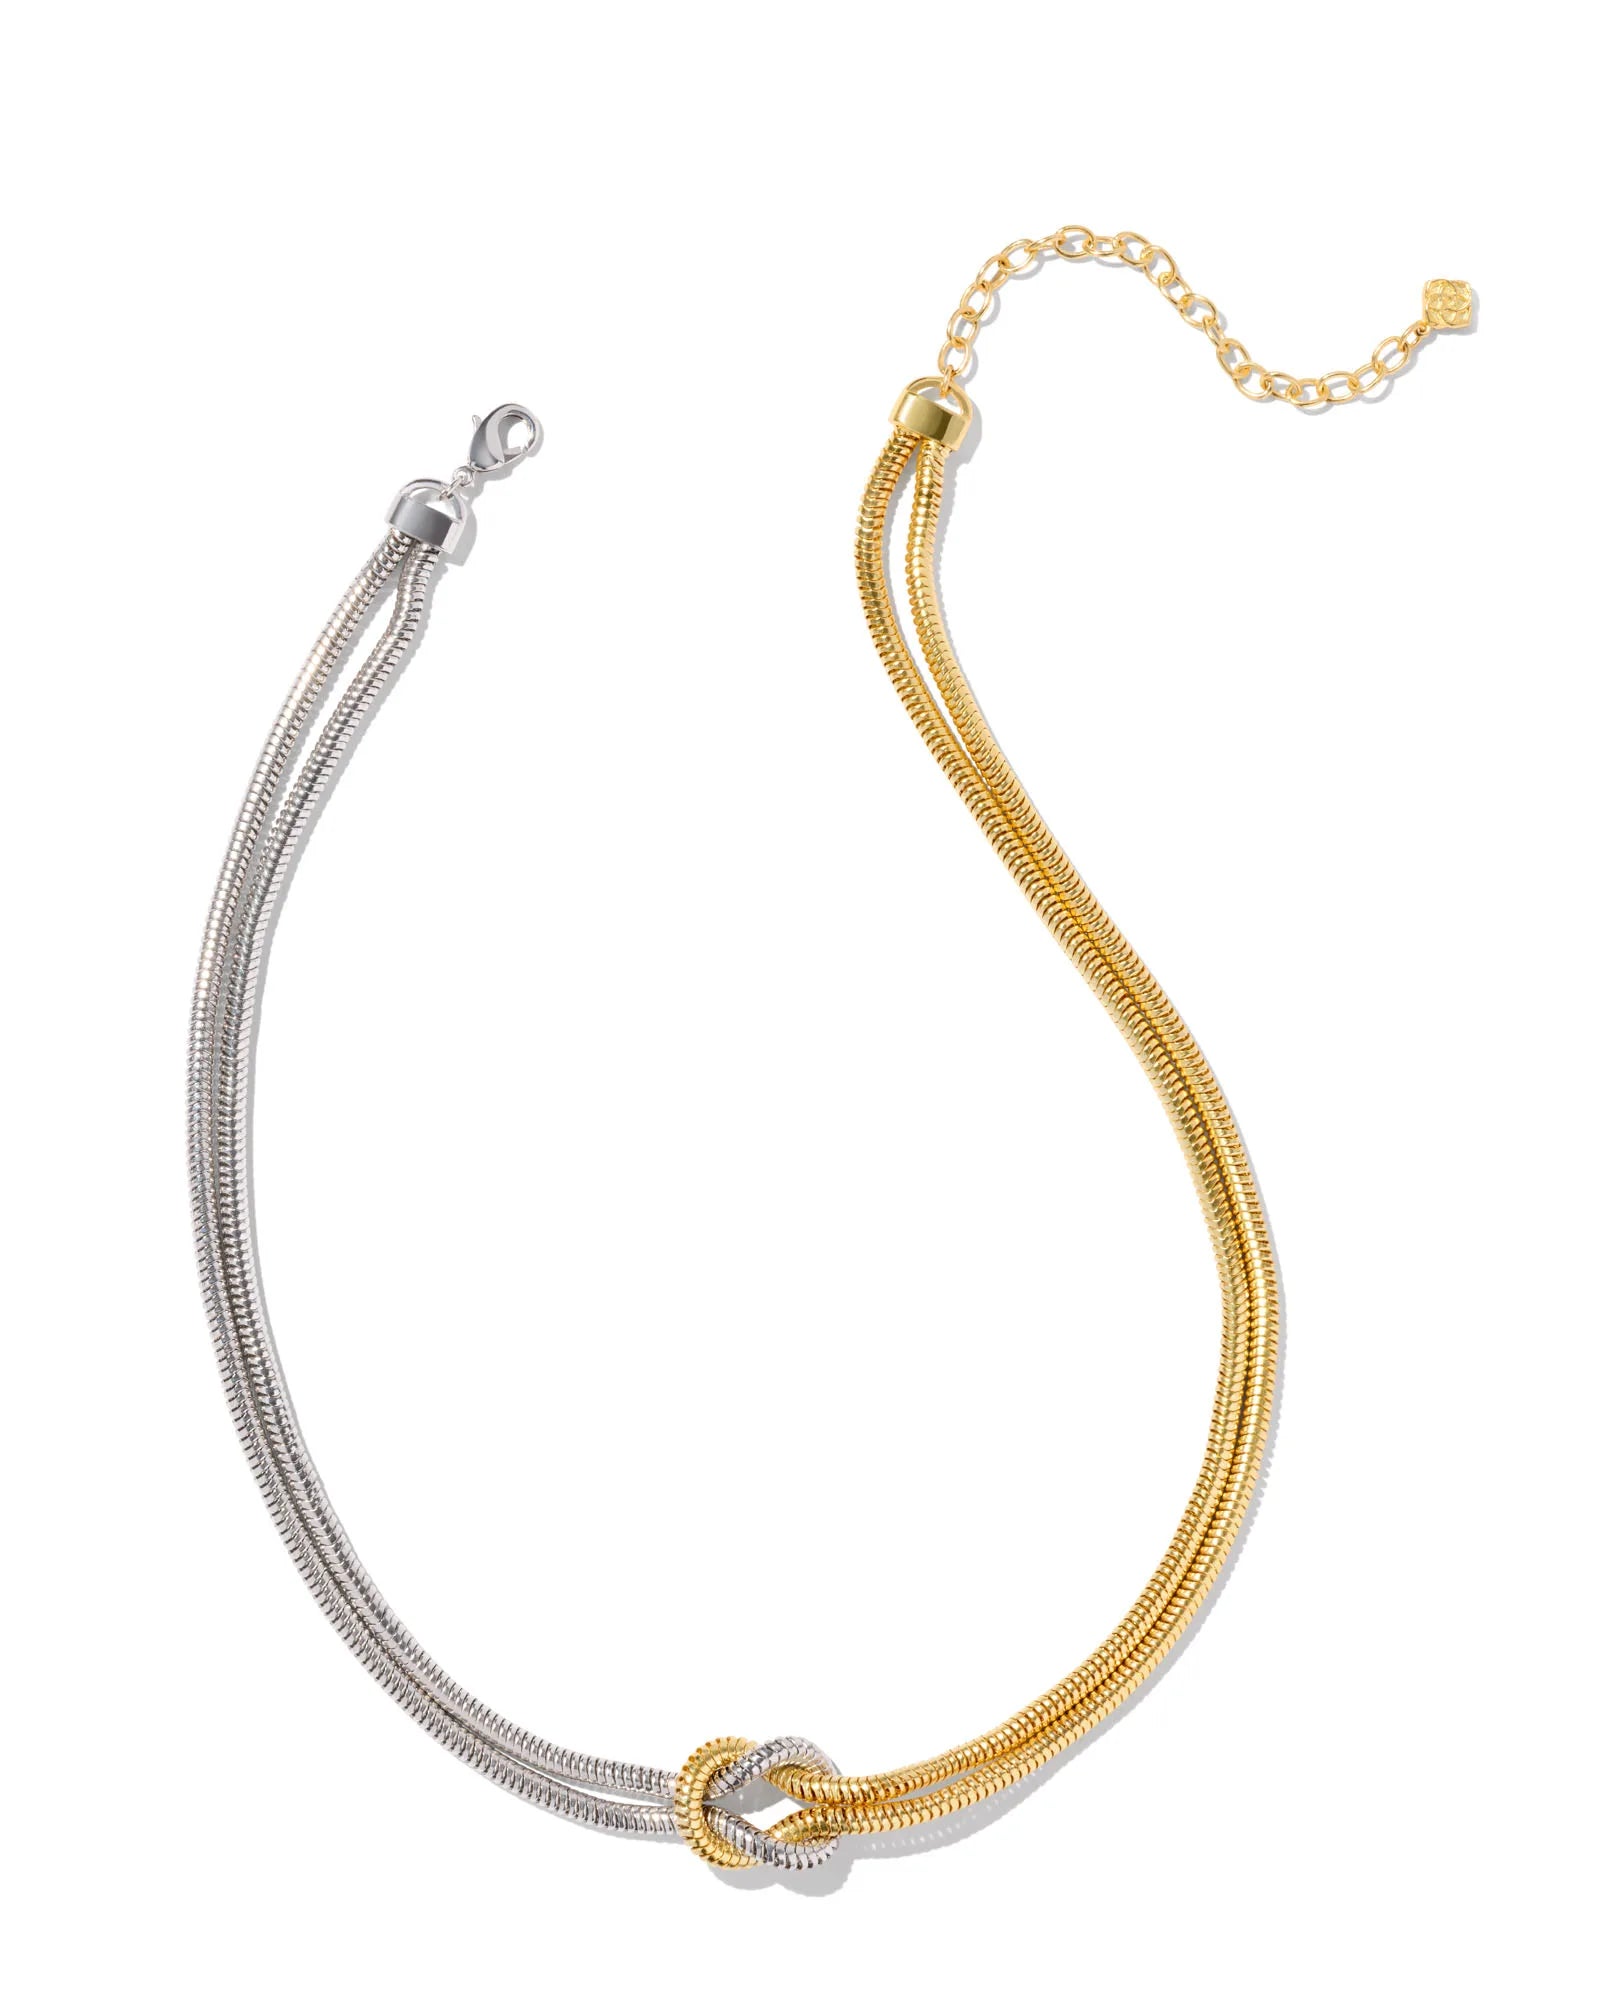 Kendra Scott - Annie Chain Necklace - MIXED METAL